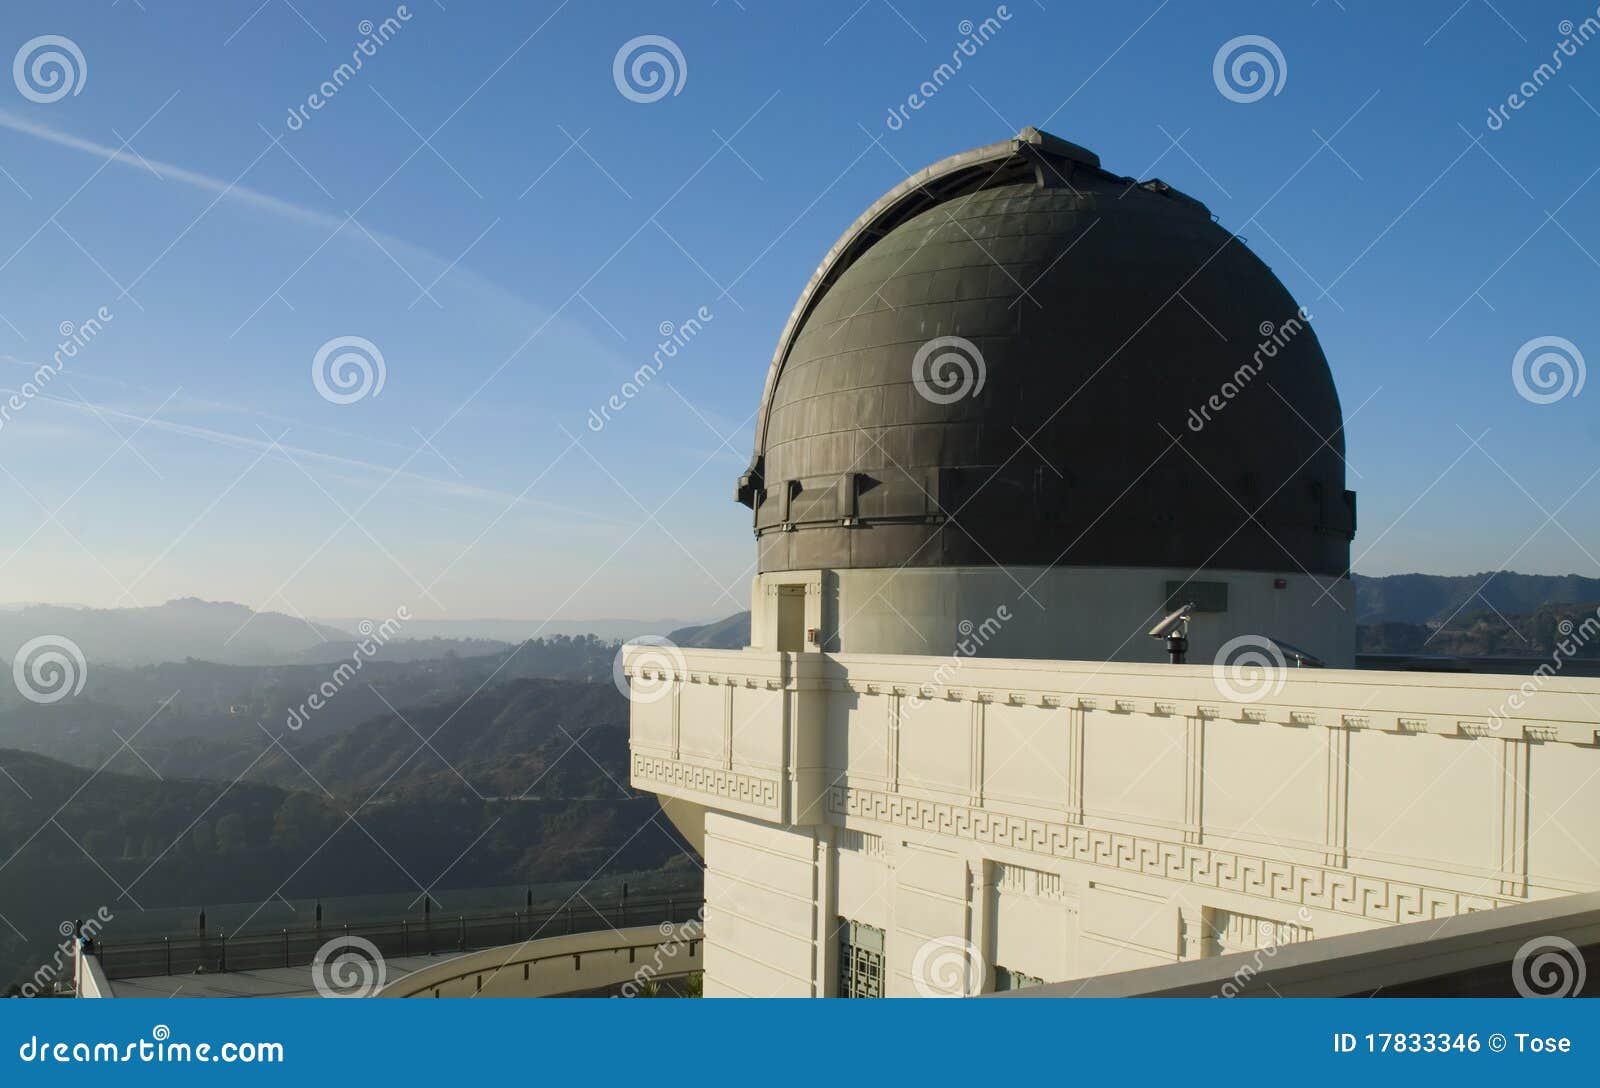 griffith park observatory in los angeles, usa